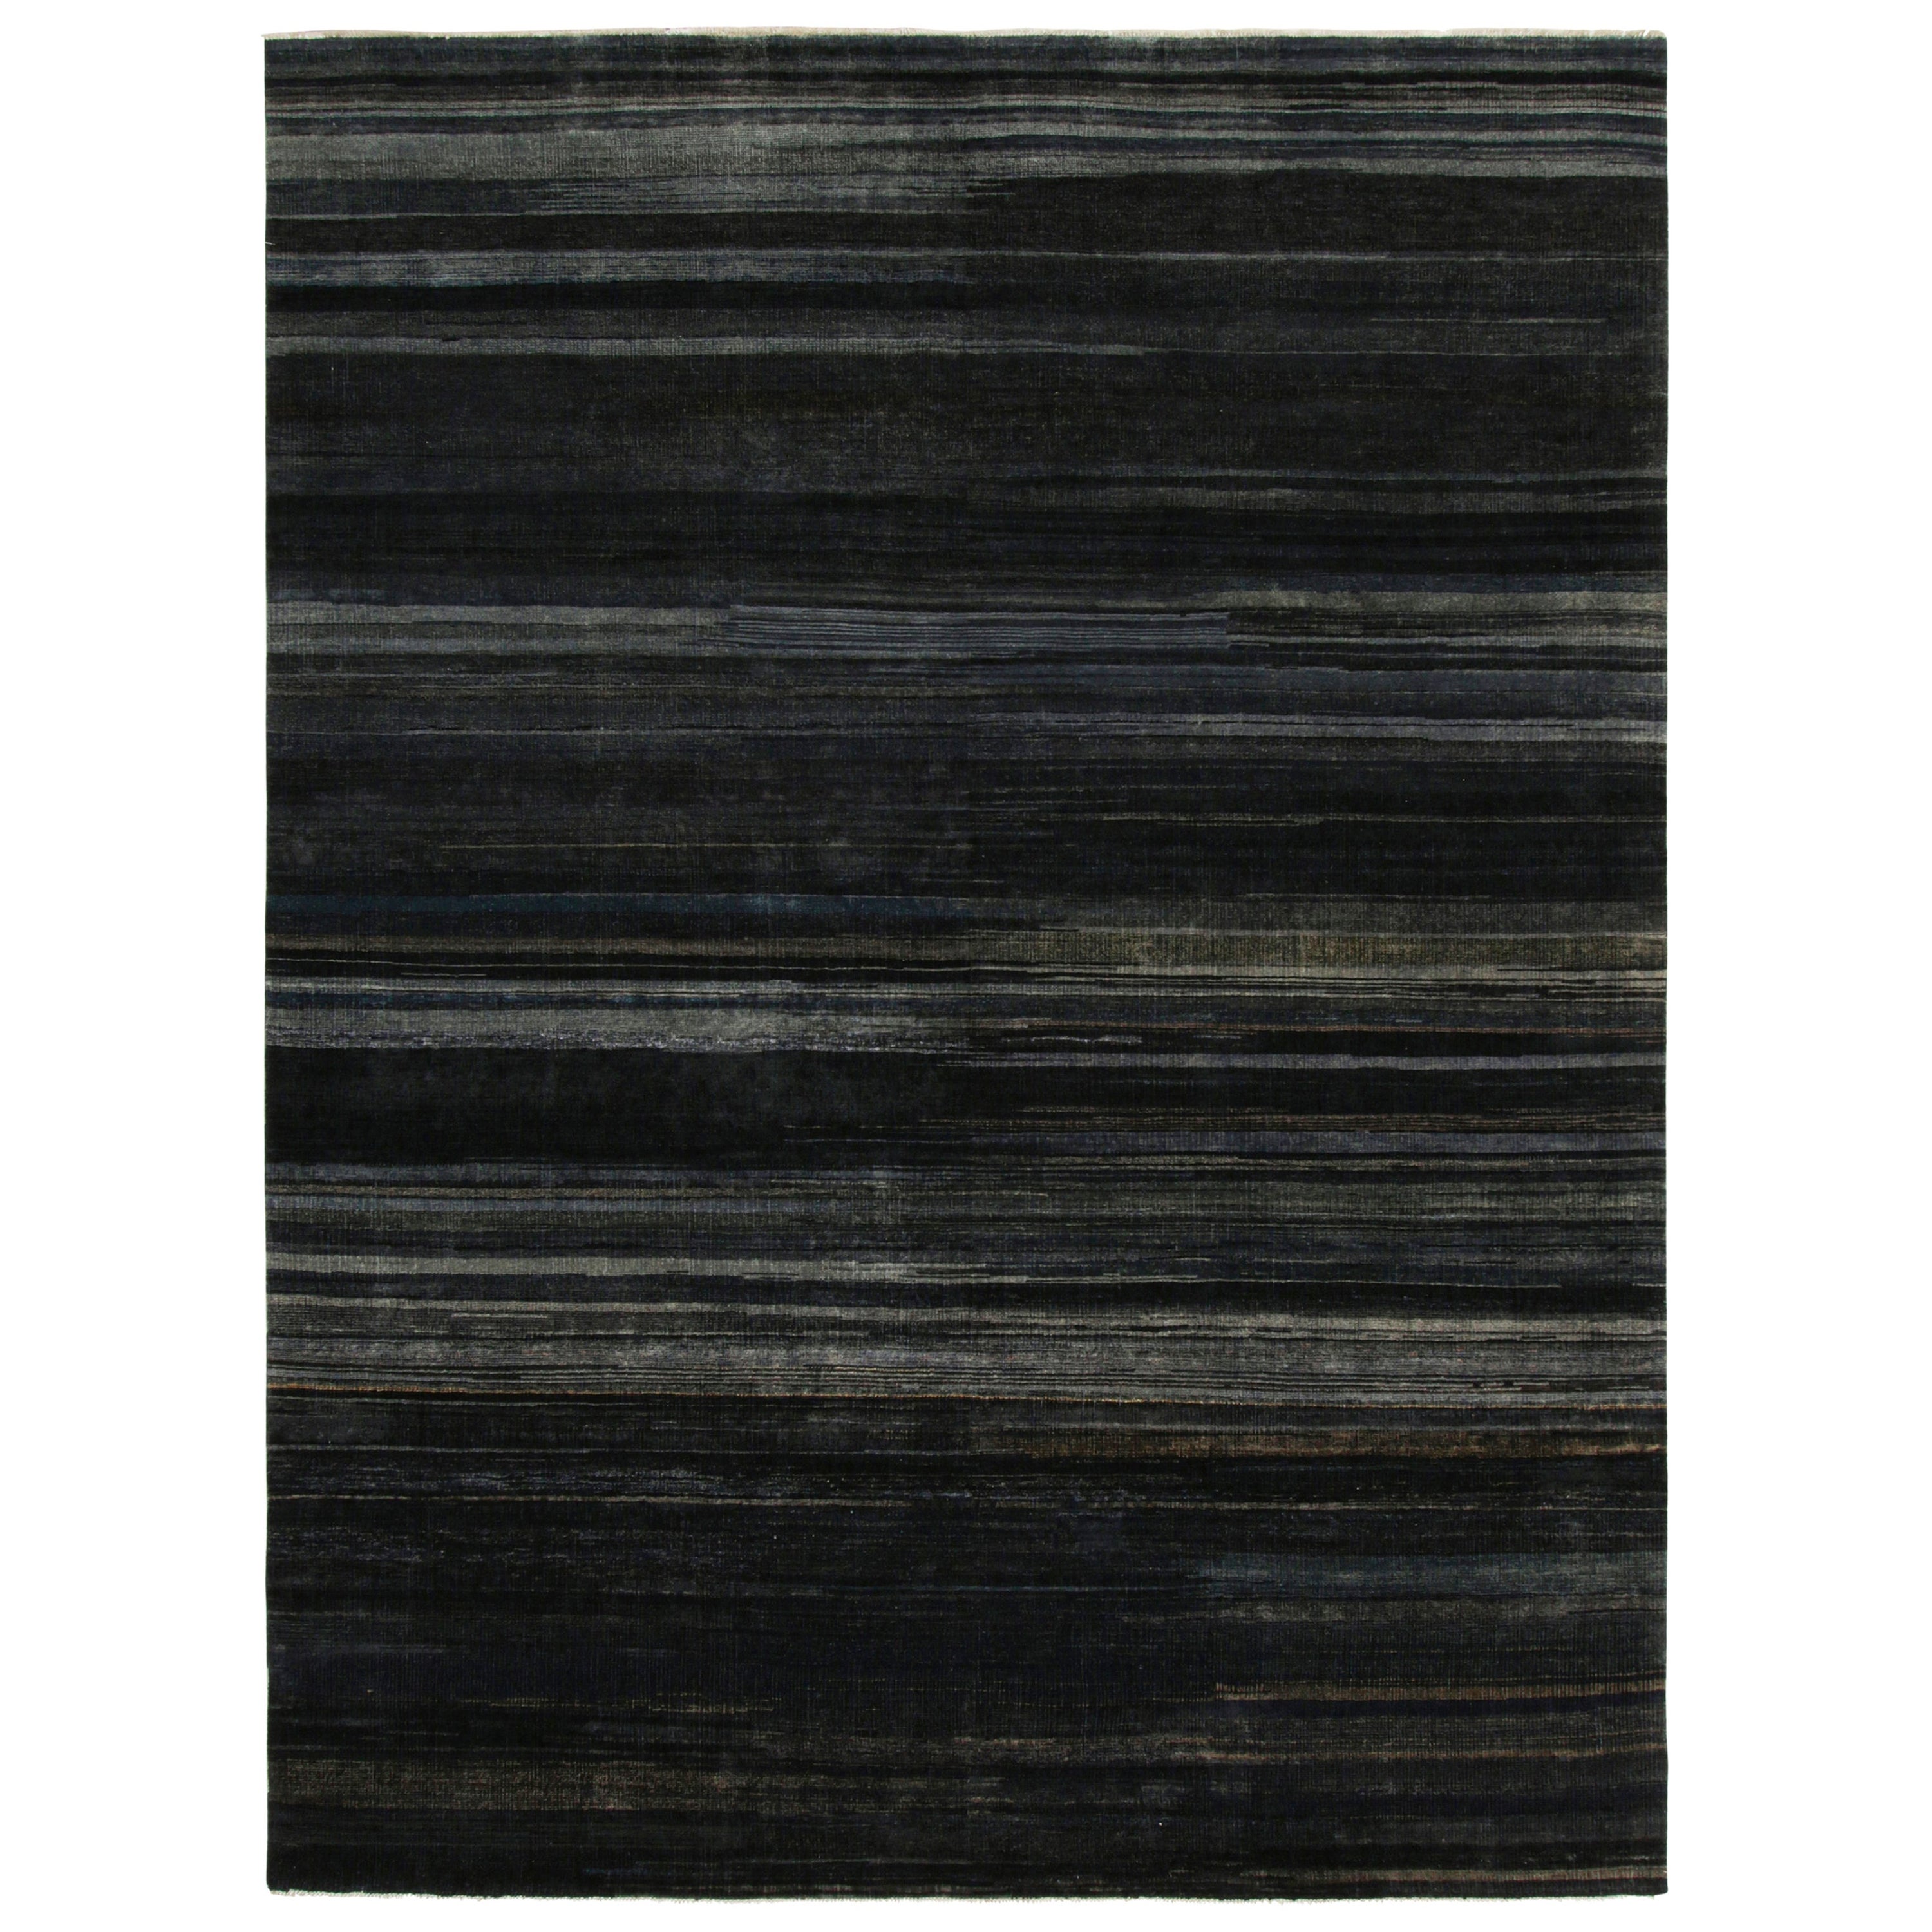 This 9x12 textural rug is an exciting new addition to the Texture of Color collection by Rug & Kilim, made with hand-knotted wool and a new take on the theme of this collection—particularly a vegetable dye like those used in antique or vintage rugs